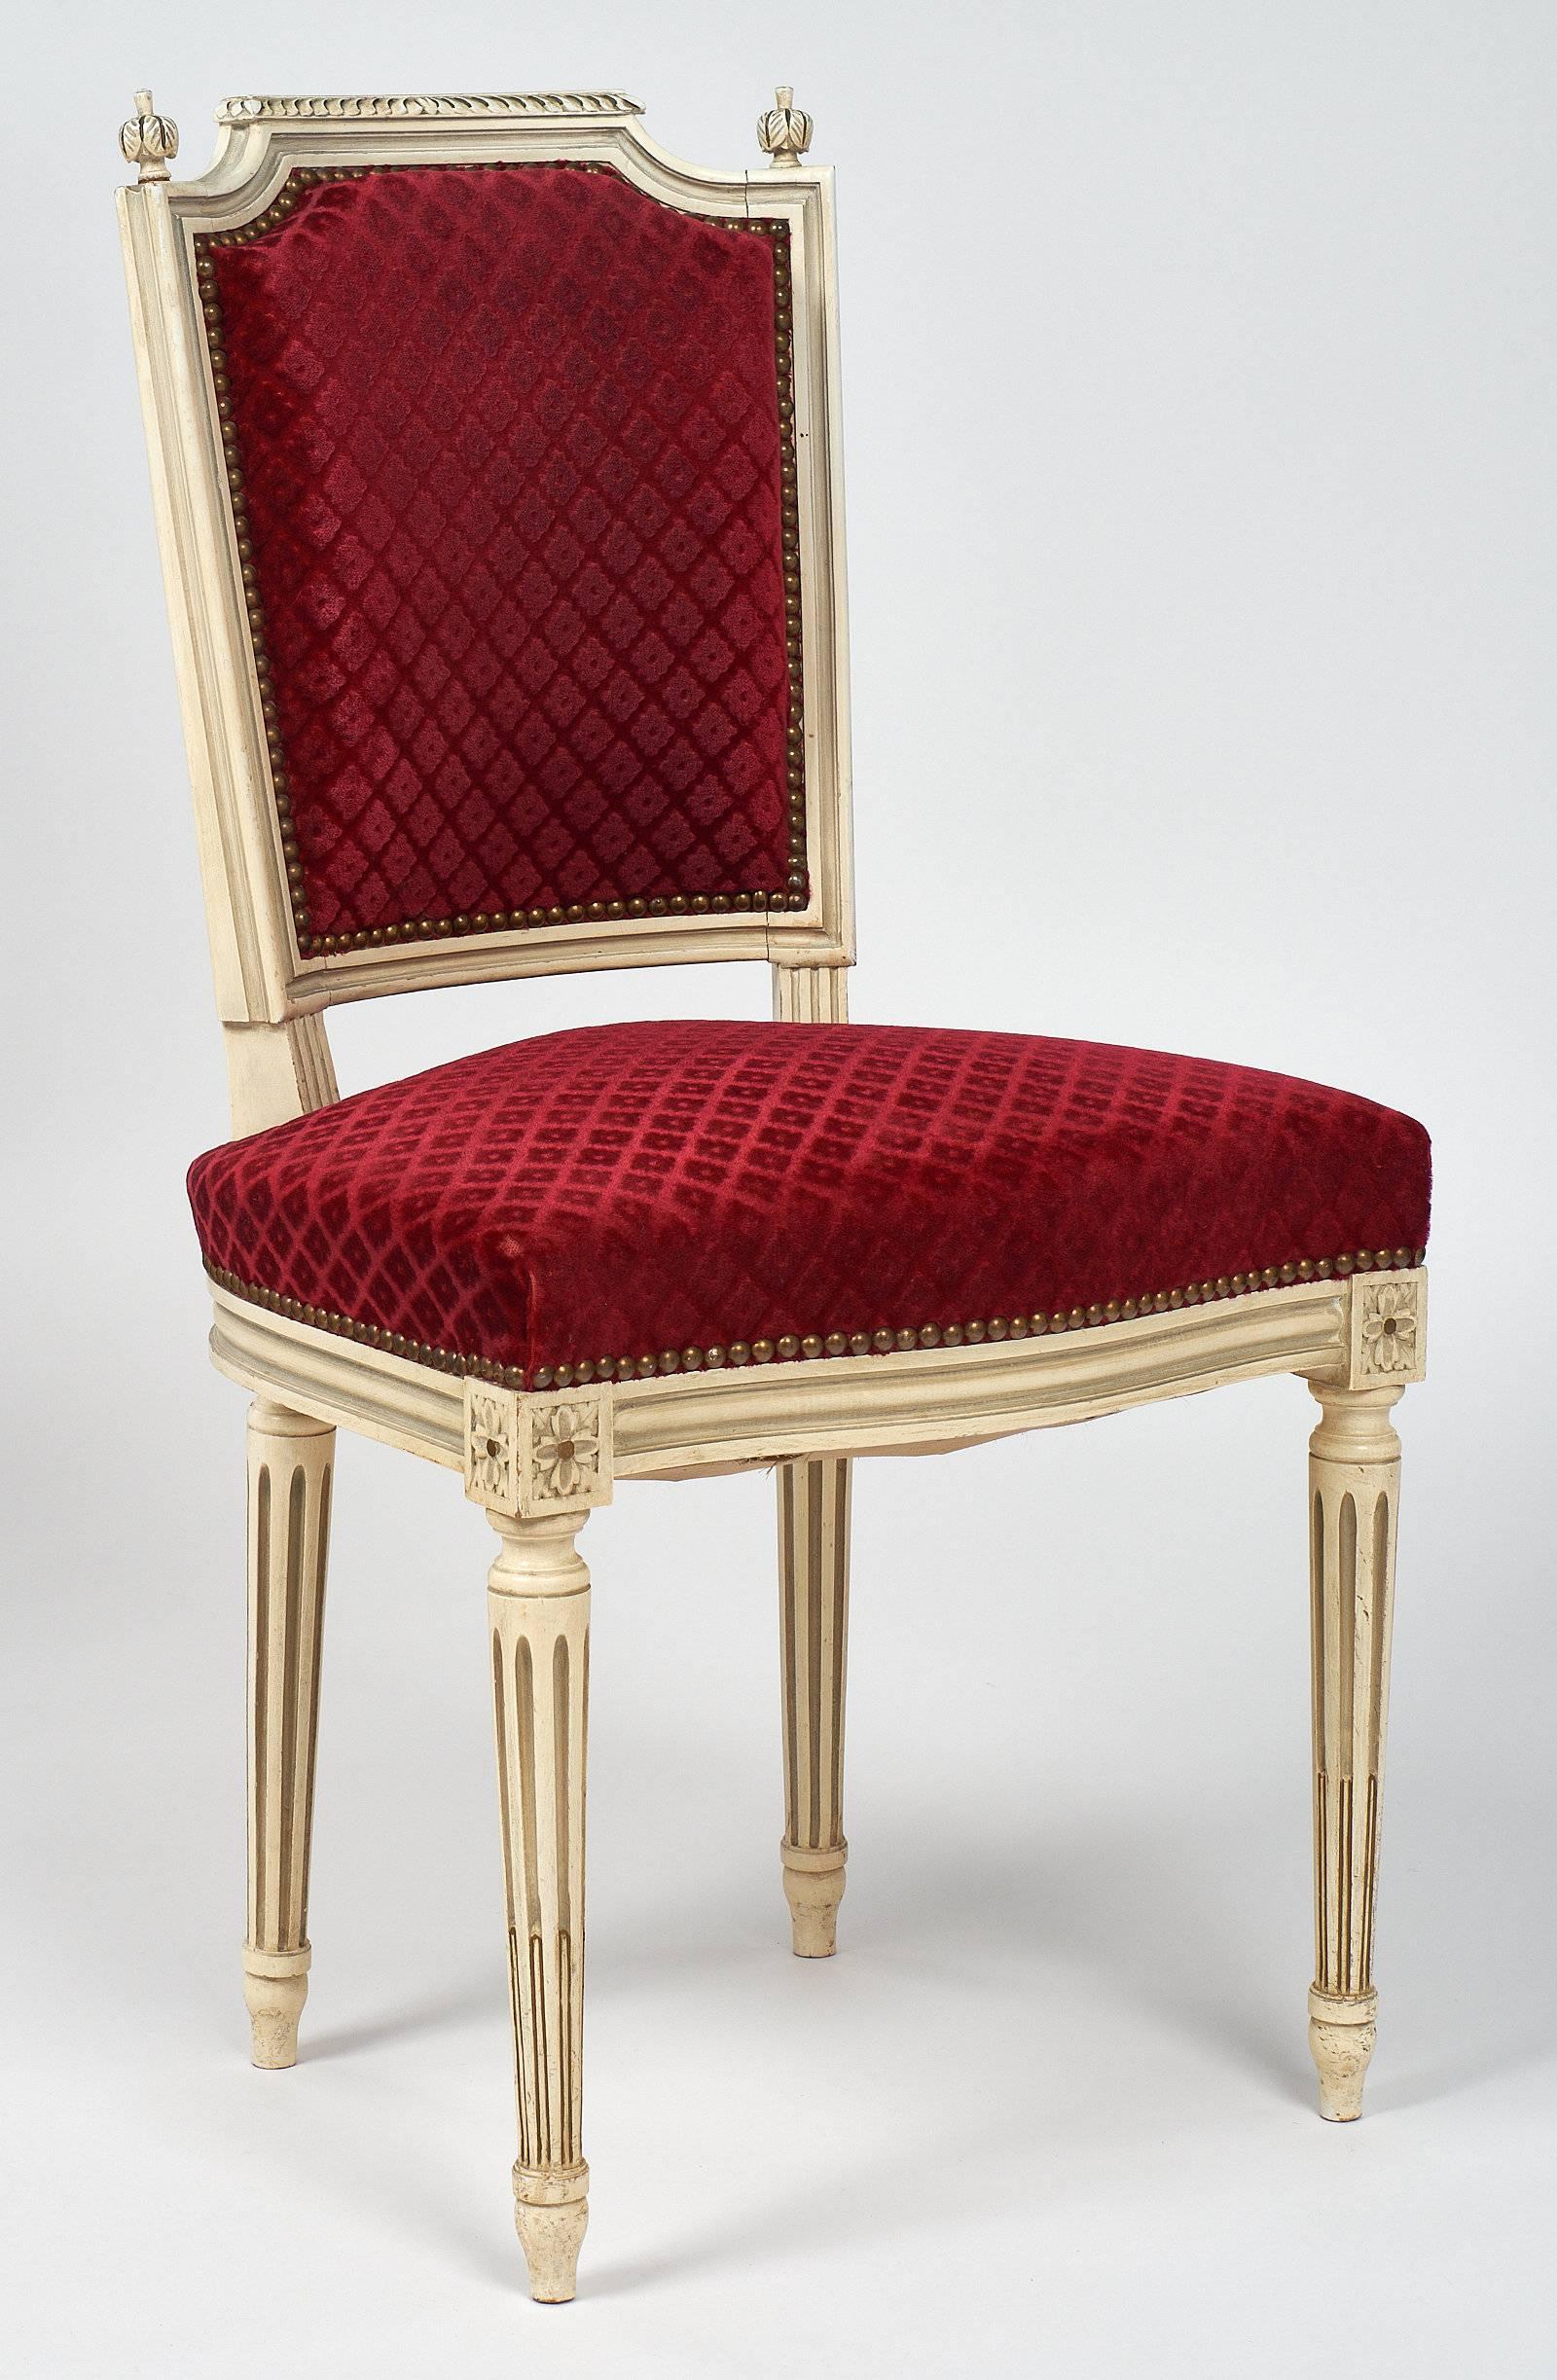 A set of six Louis XVI style velvet dining chair from France with their original paint and upholstery. They have a very strong structure and are in excellent antique condition. We loved the crisp, hand-carved details, and the brass nailheads